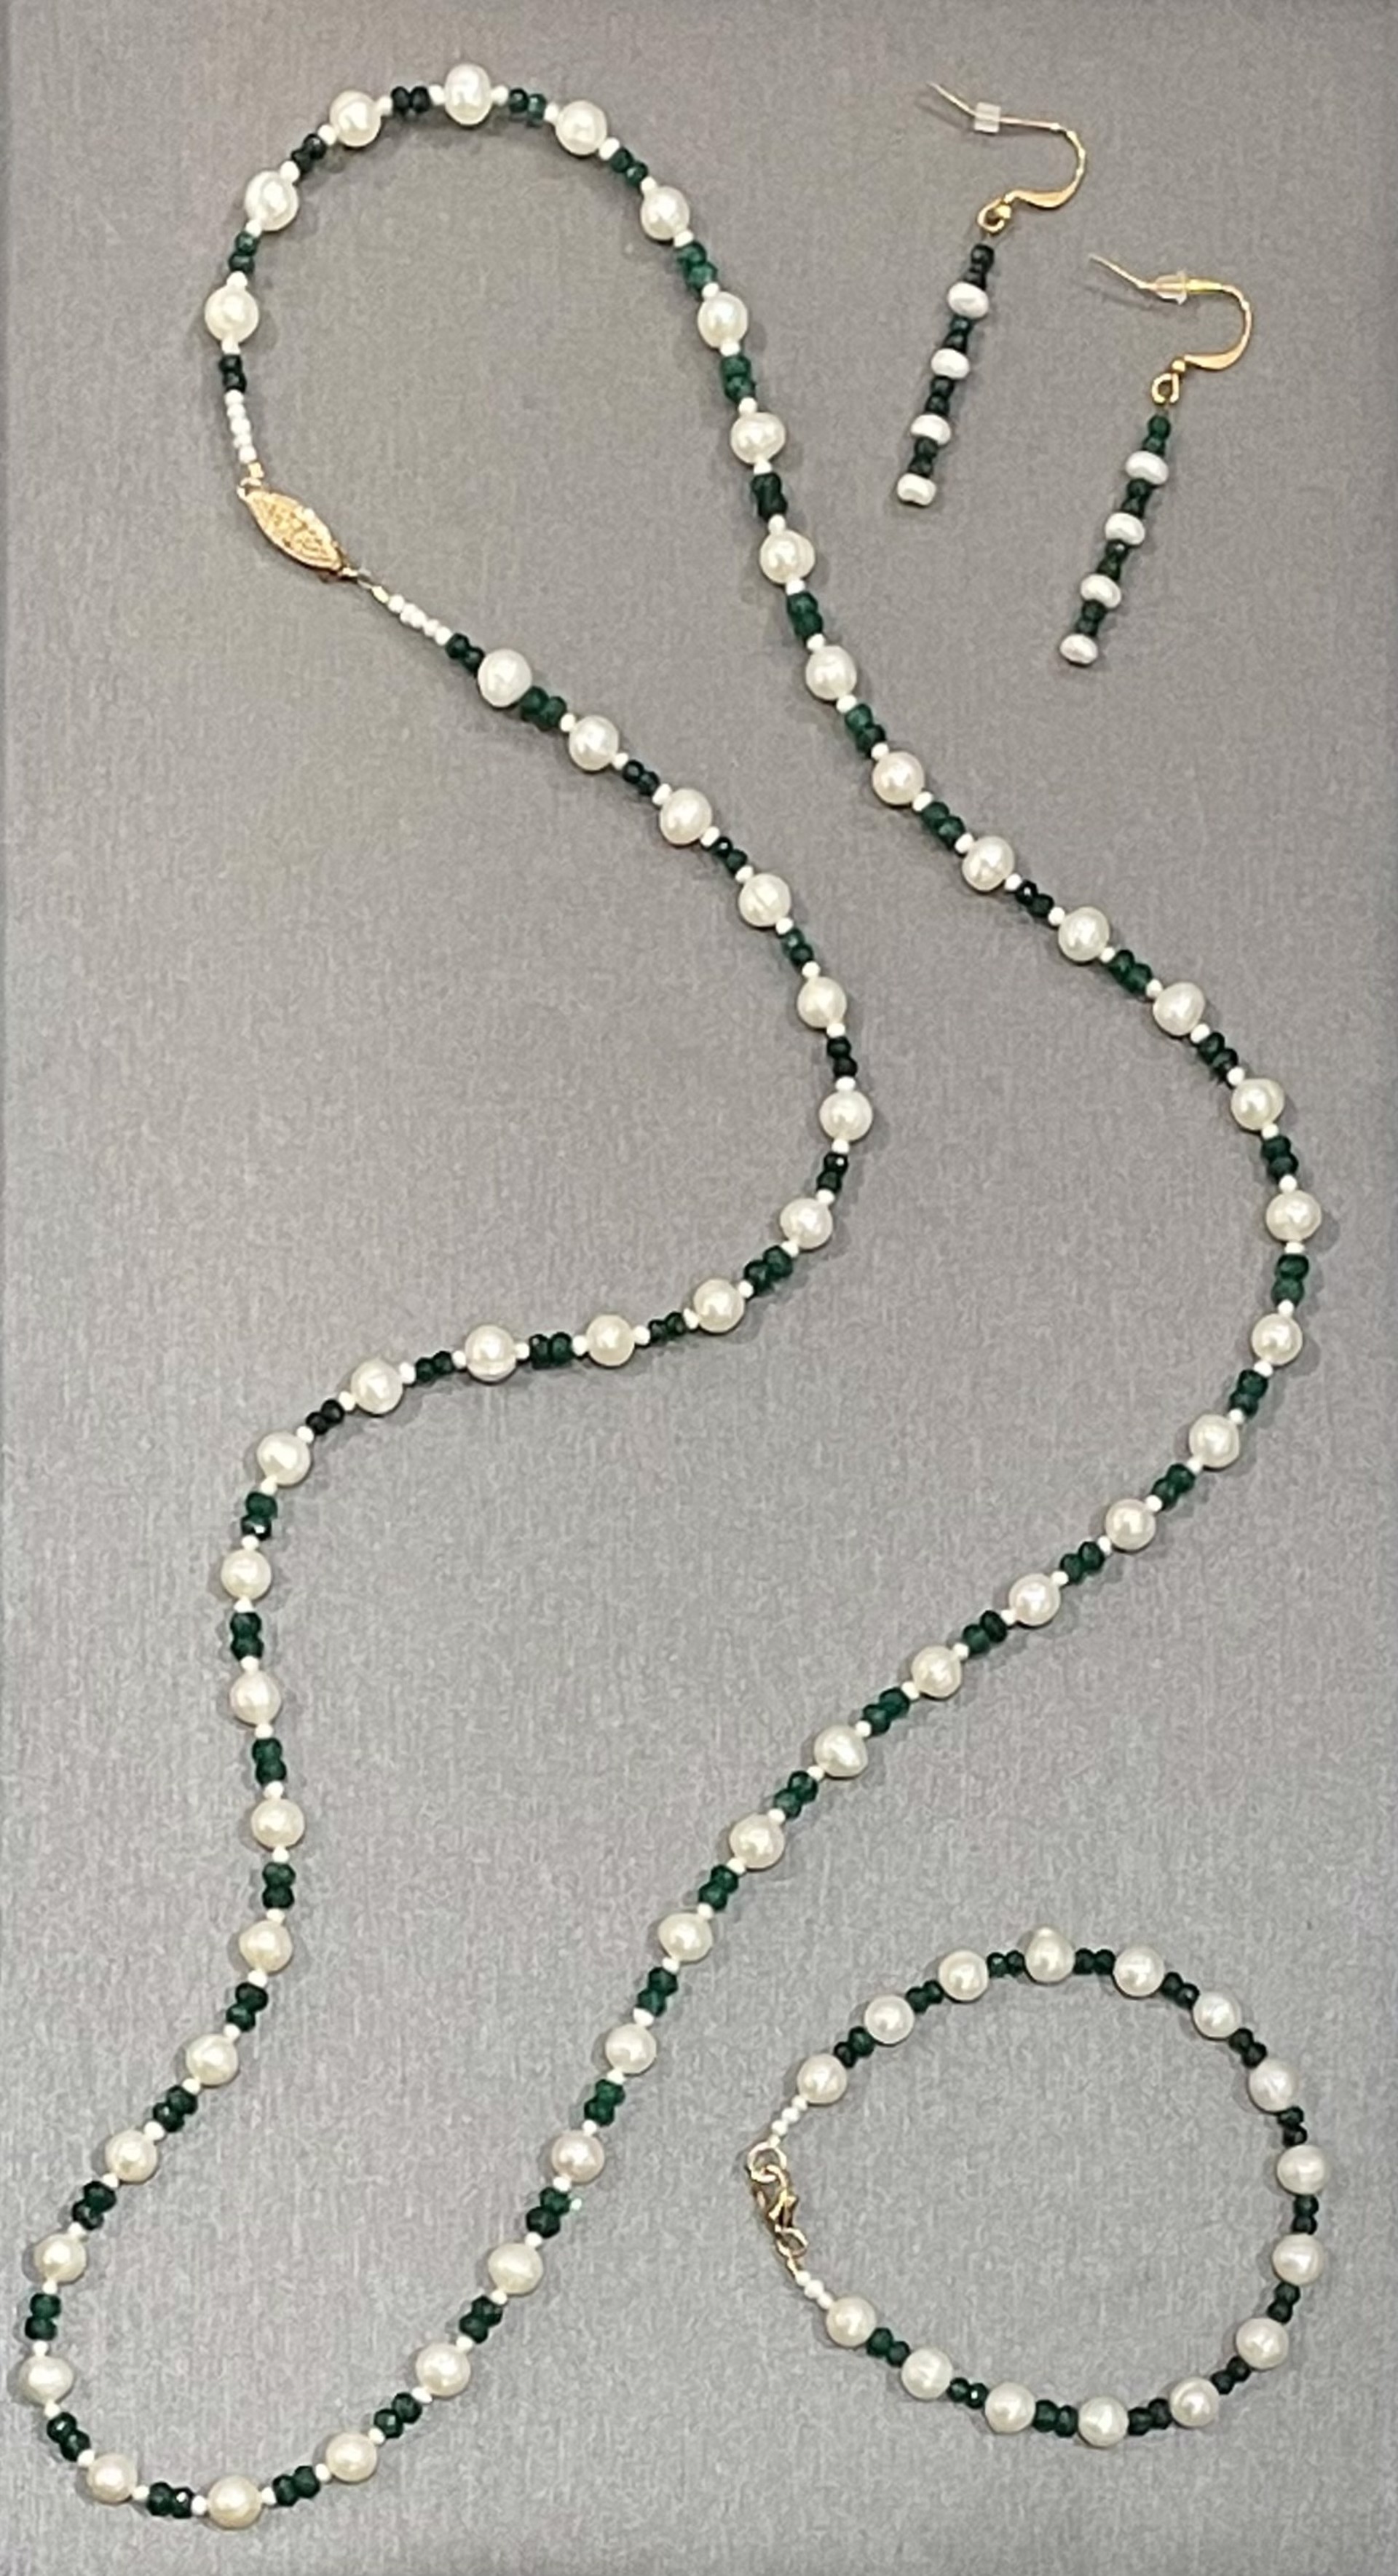 Emeralds and Pearls Necklace, Bracelet, Earrings by Patrice Box